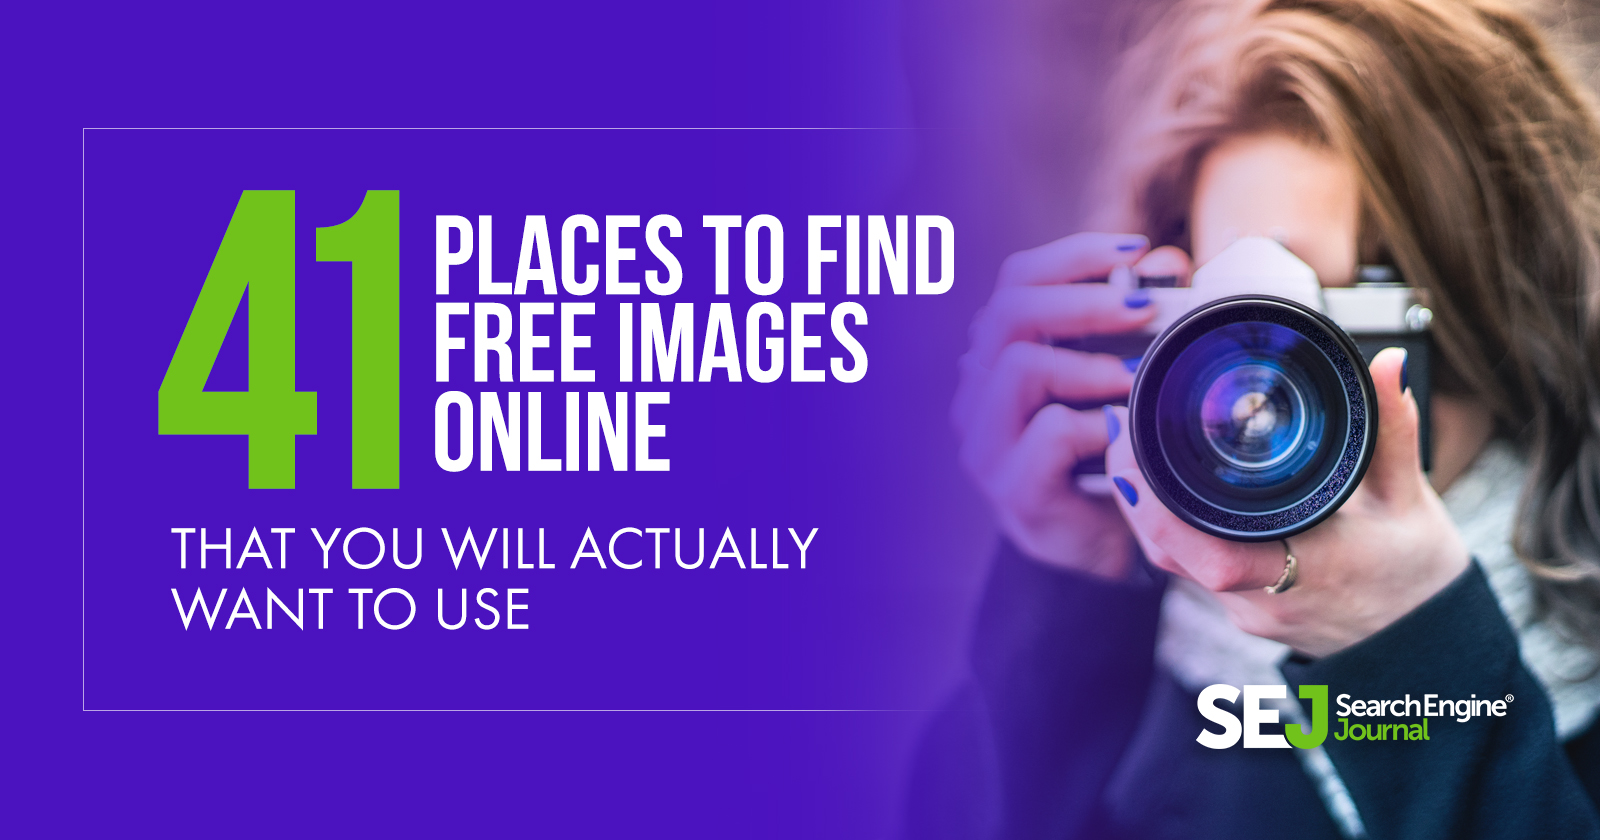 41 Best Stock Photo Sites to Find Great FREE Images